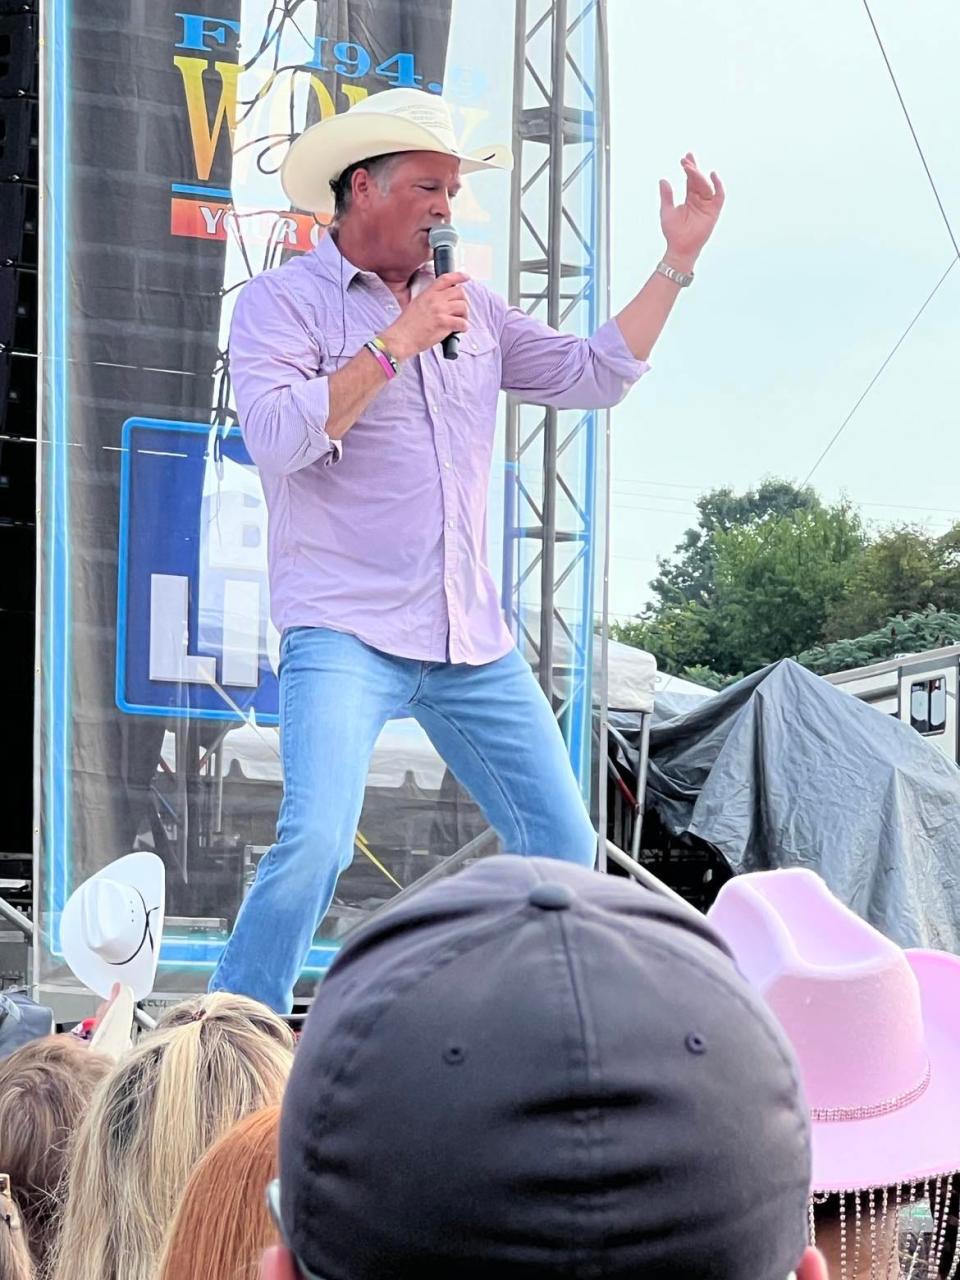 Tracy Byrd performs Friday during the Neon Nights country music festival. The event continues Saturday at Clay's Resort Jellystone Park in Lawrence Township in Stark County.